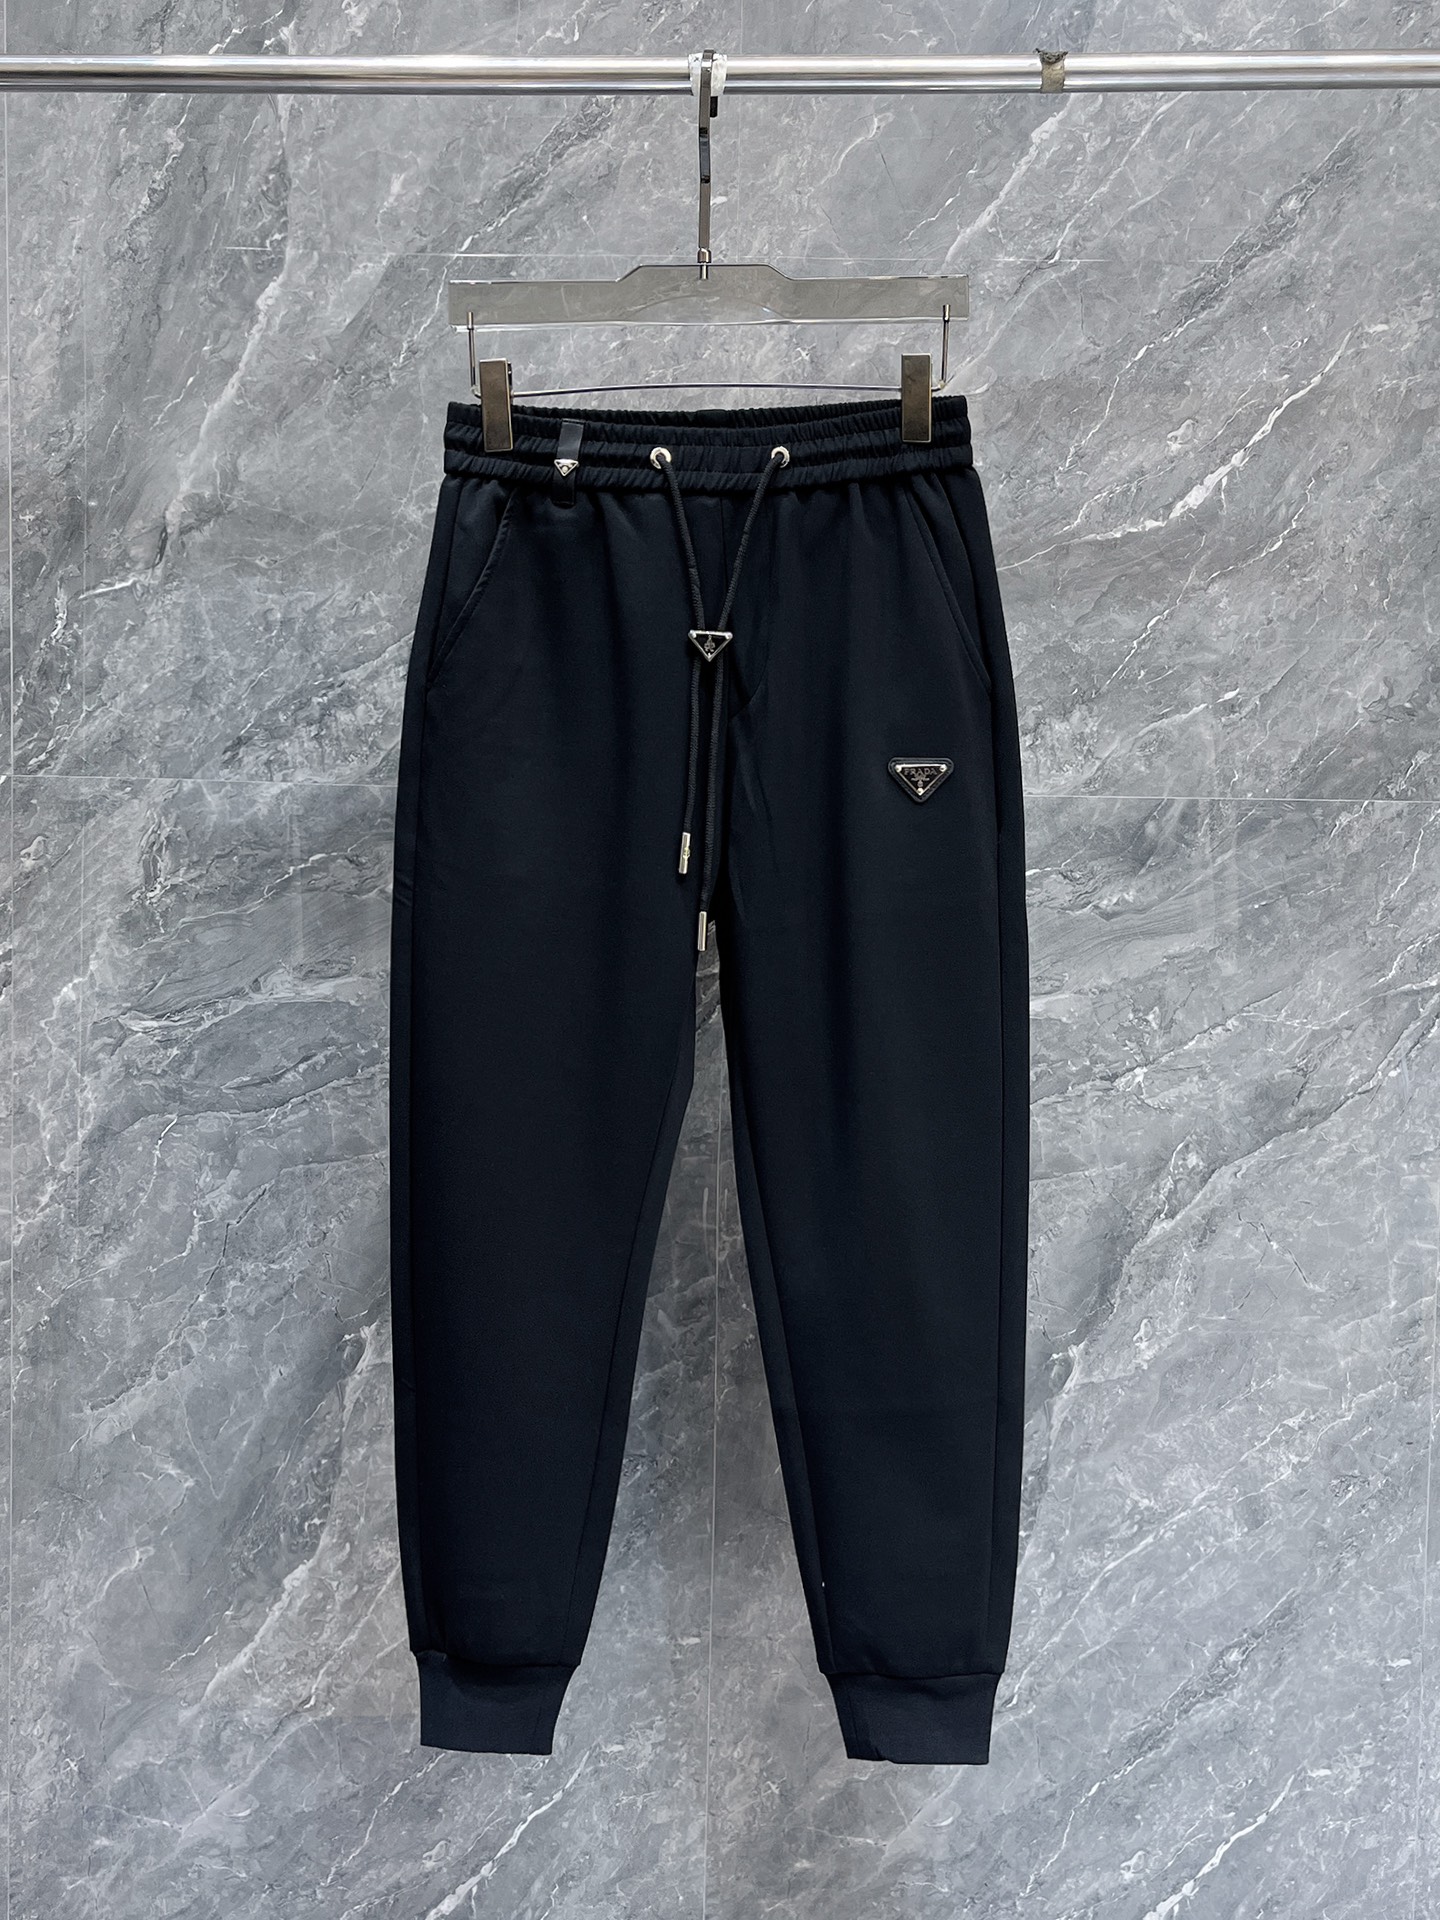 Prada Clothing Pants & Trousers Summer Collection Casual